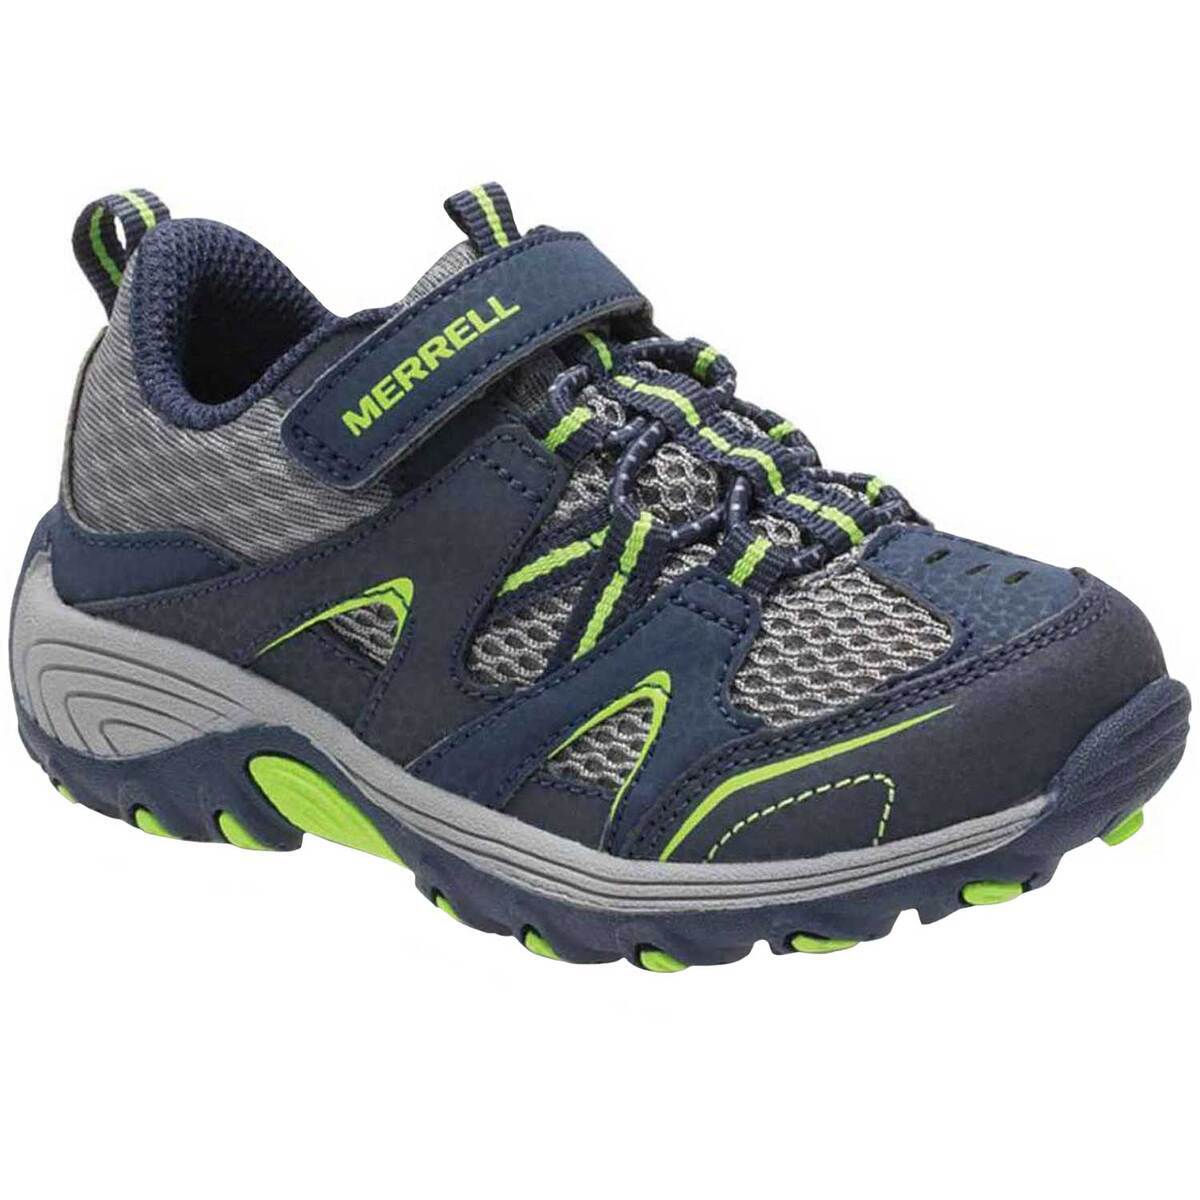 salvie Penelope Isaac Merrell Youth Trail Chaser Jr Low Hiking Shoes | Sportsman's Warehouse